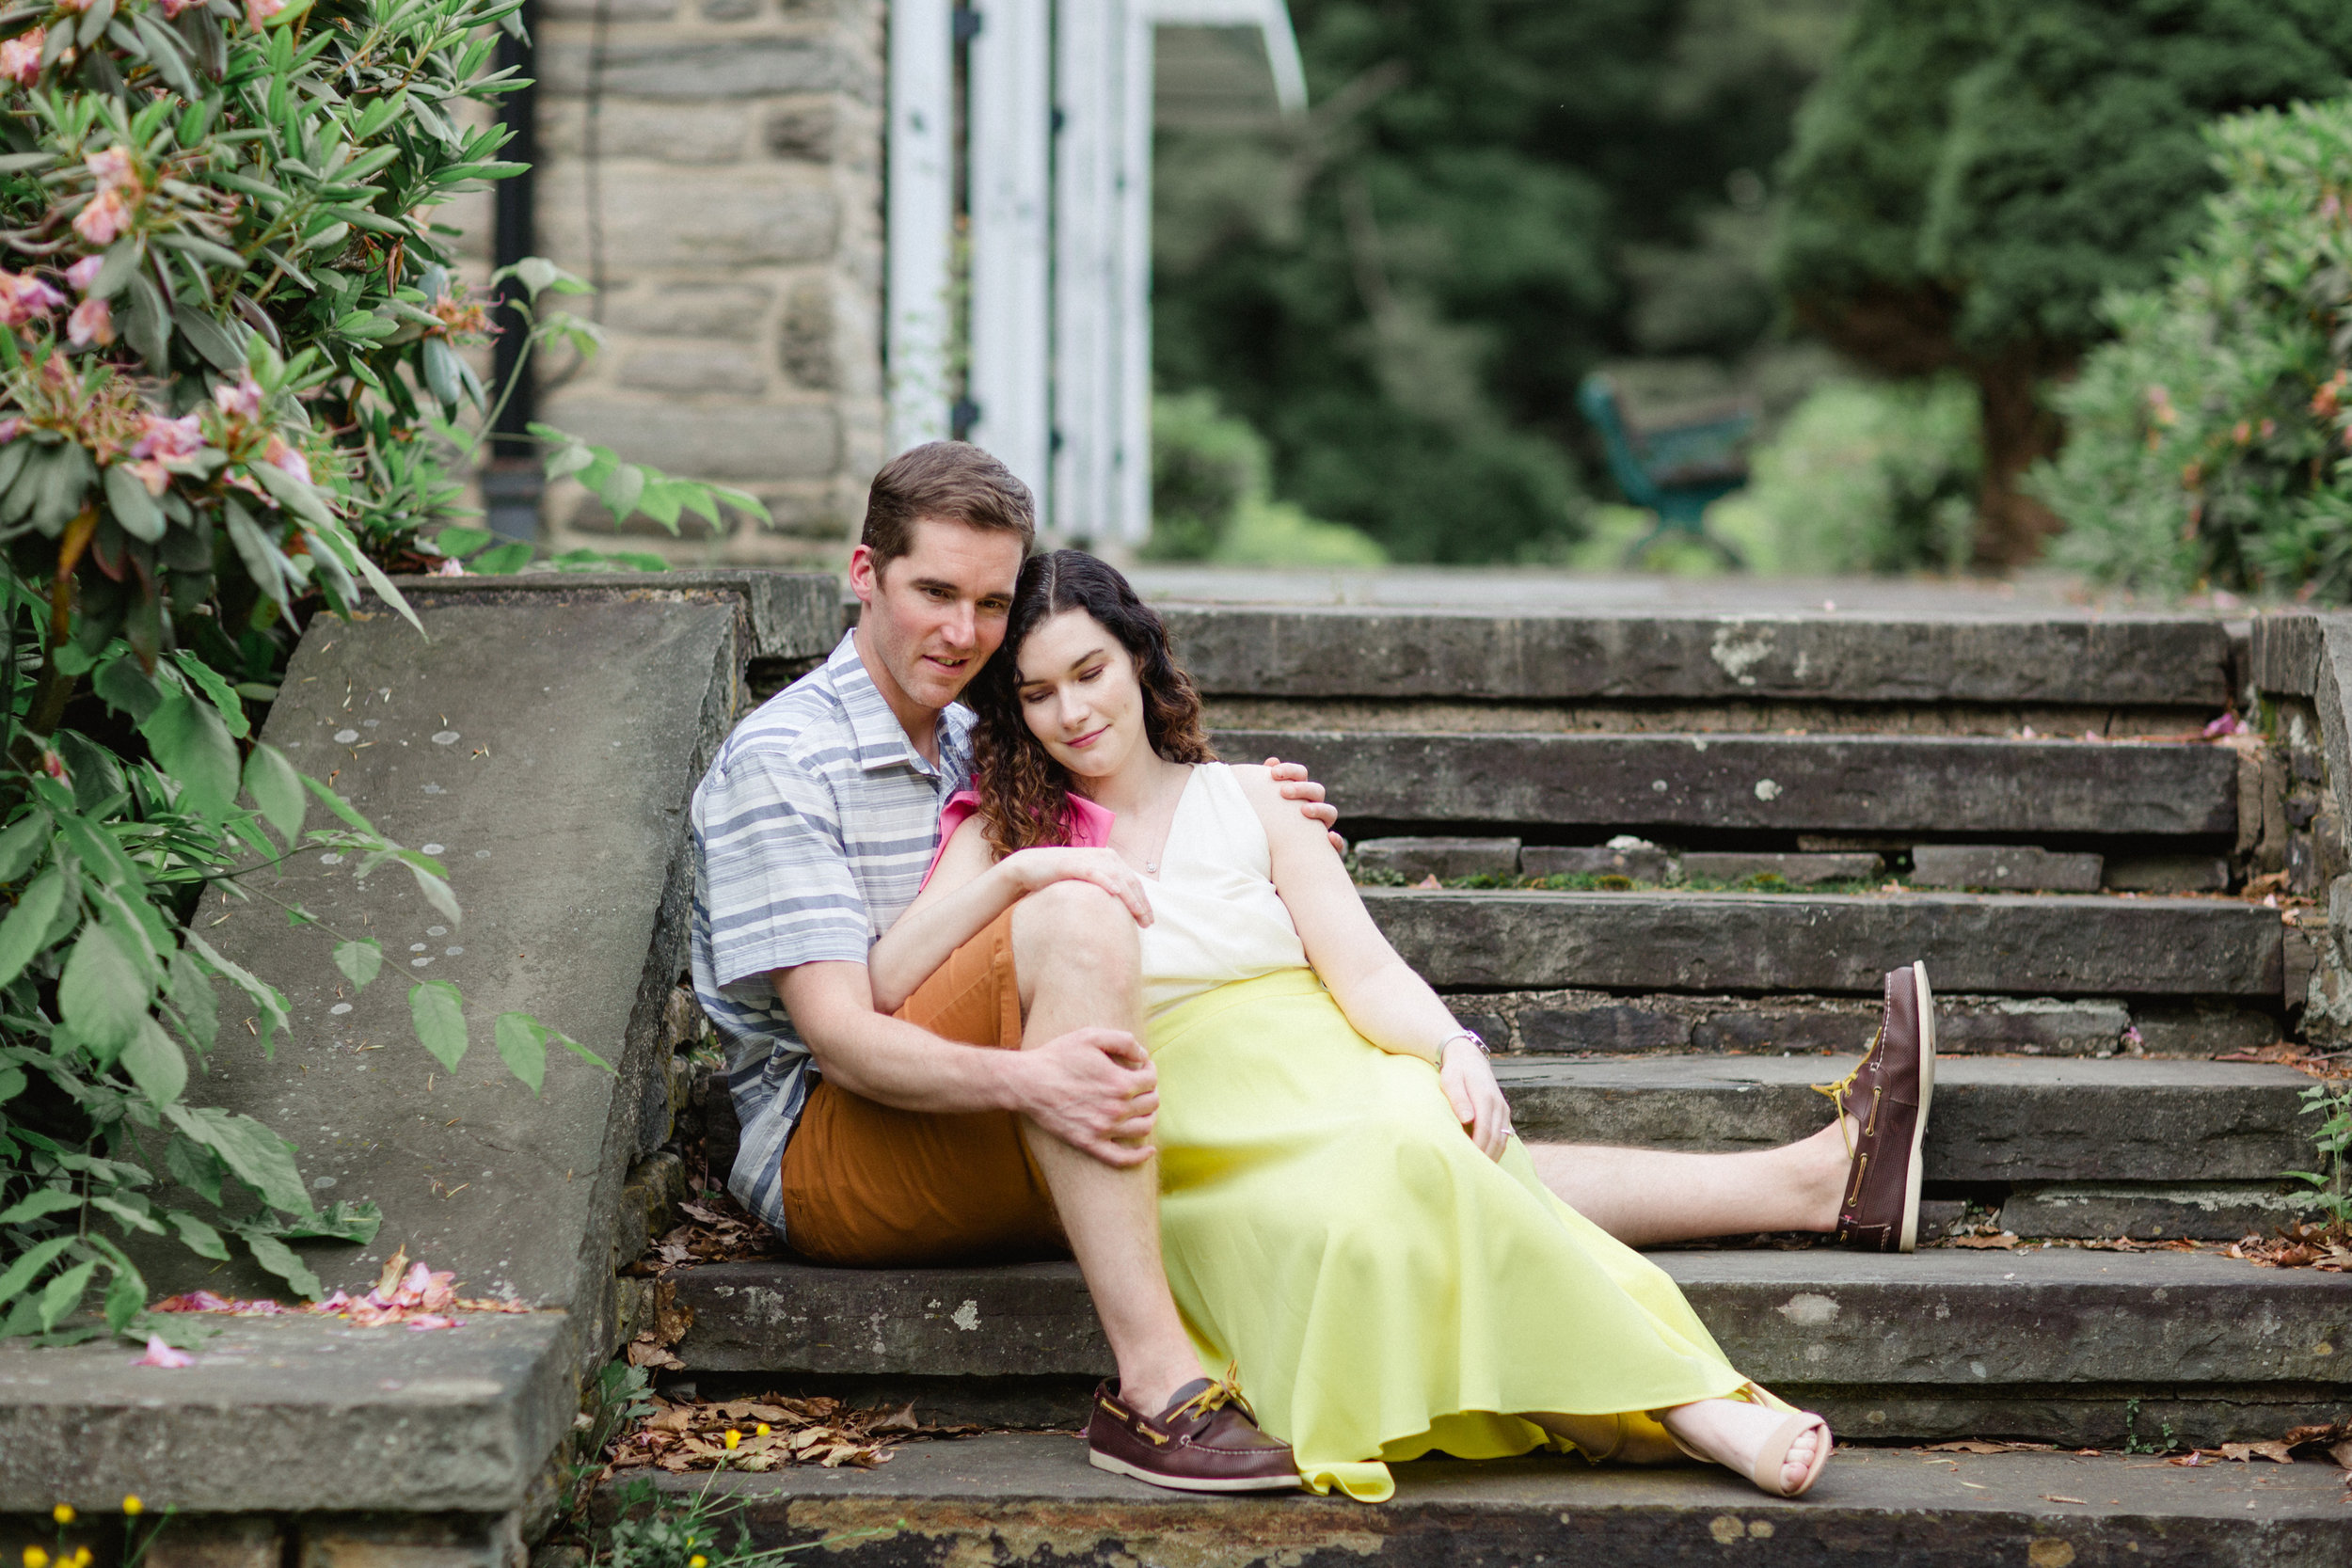 Moscow PA Engagement Session Photos_JDP-13.jpg